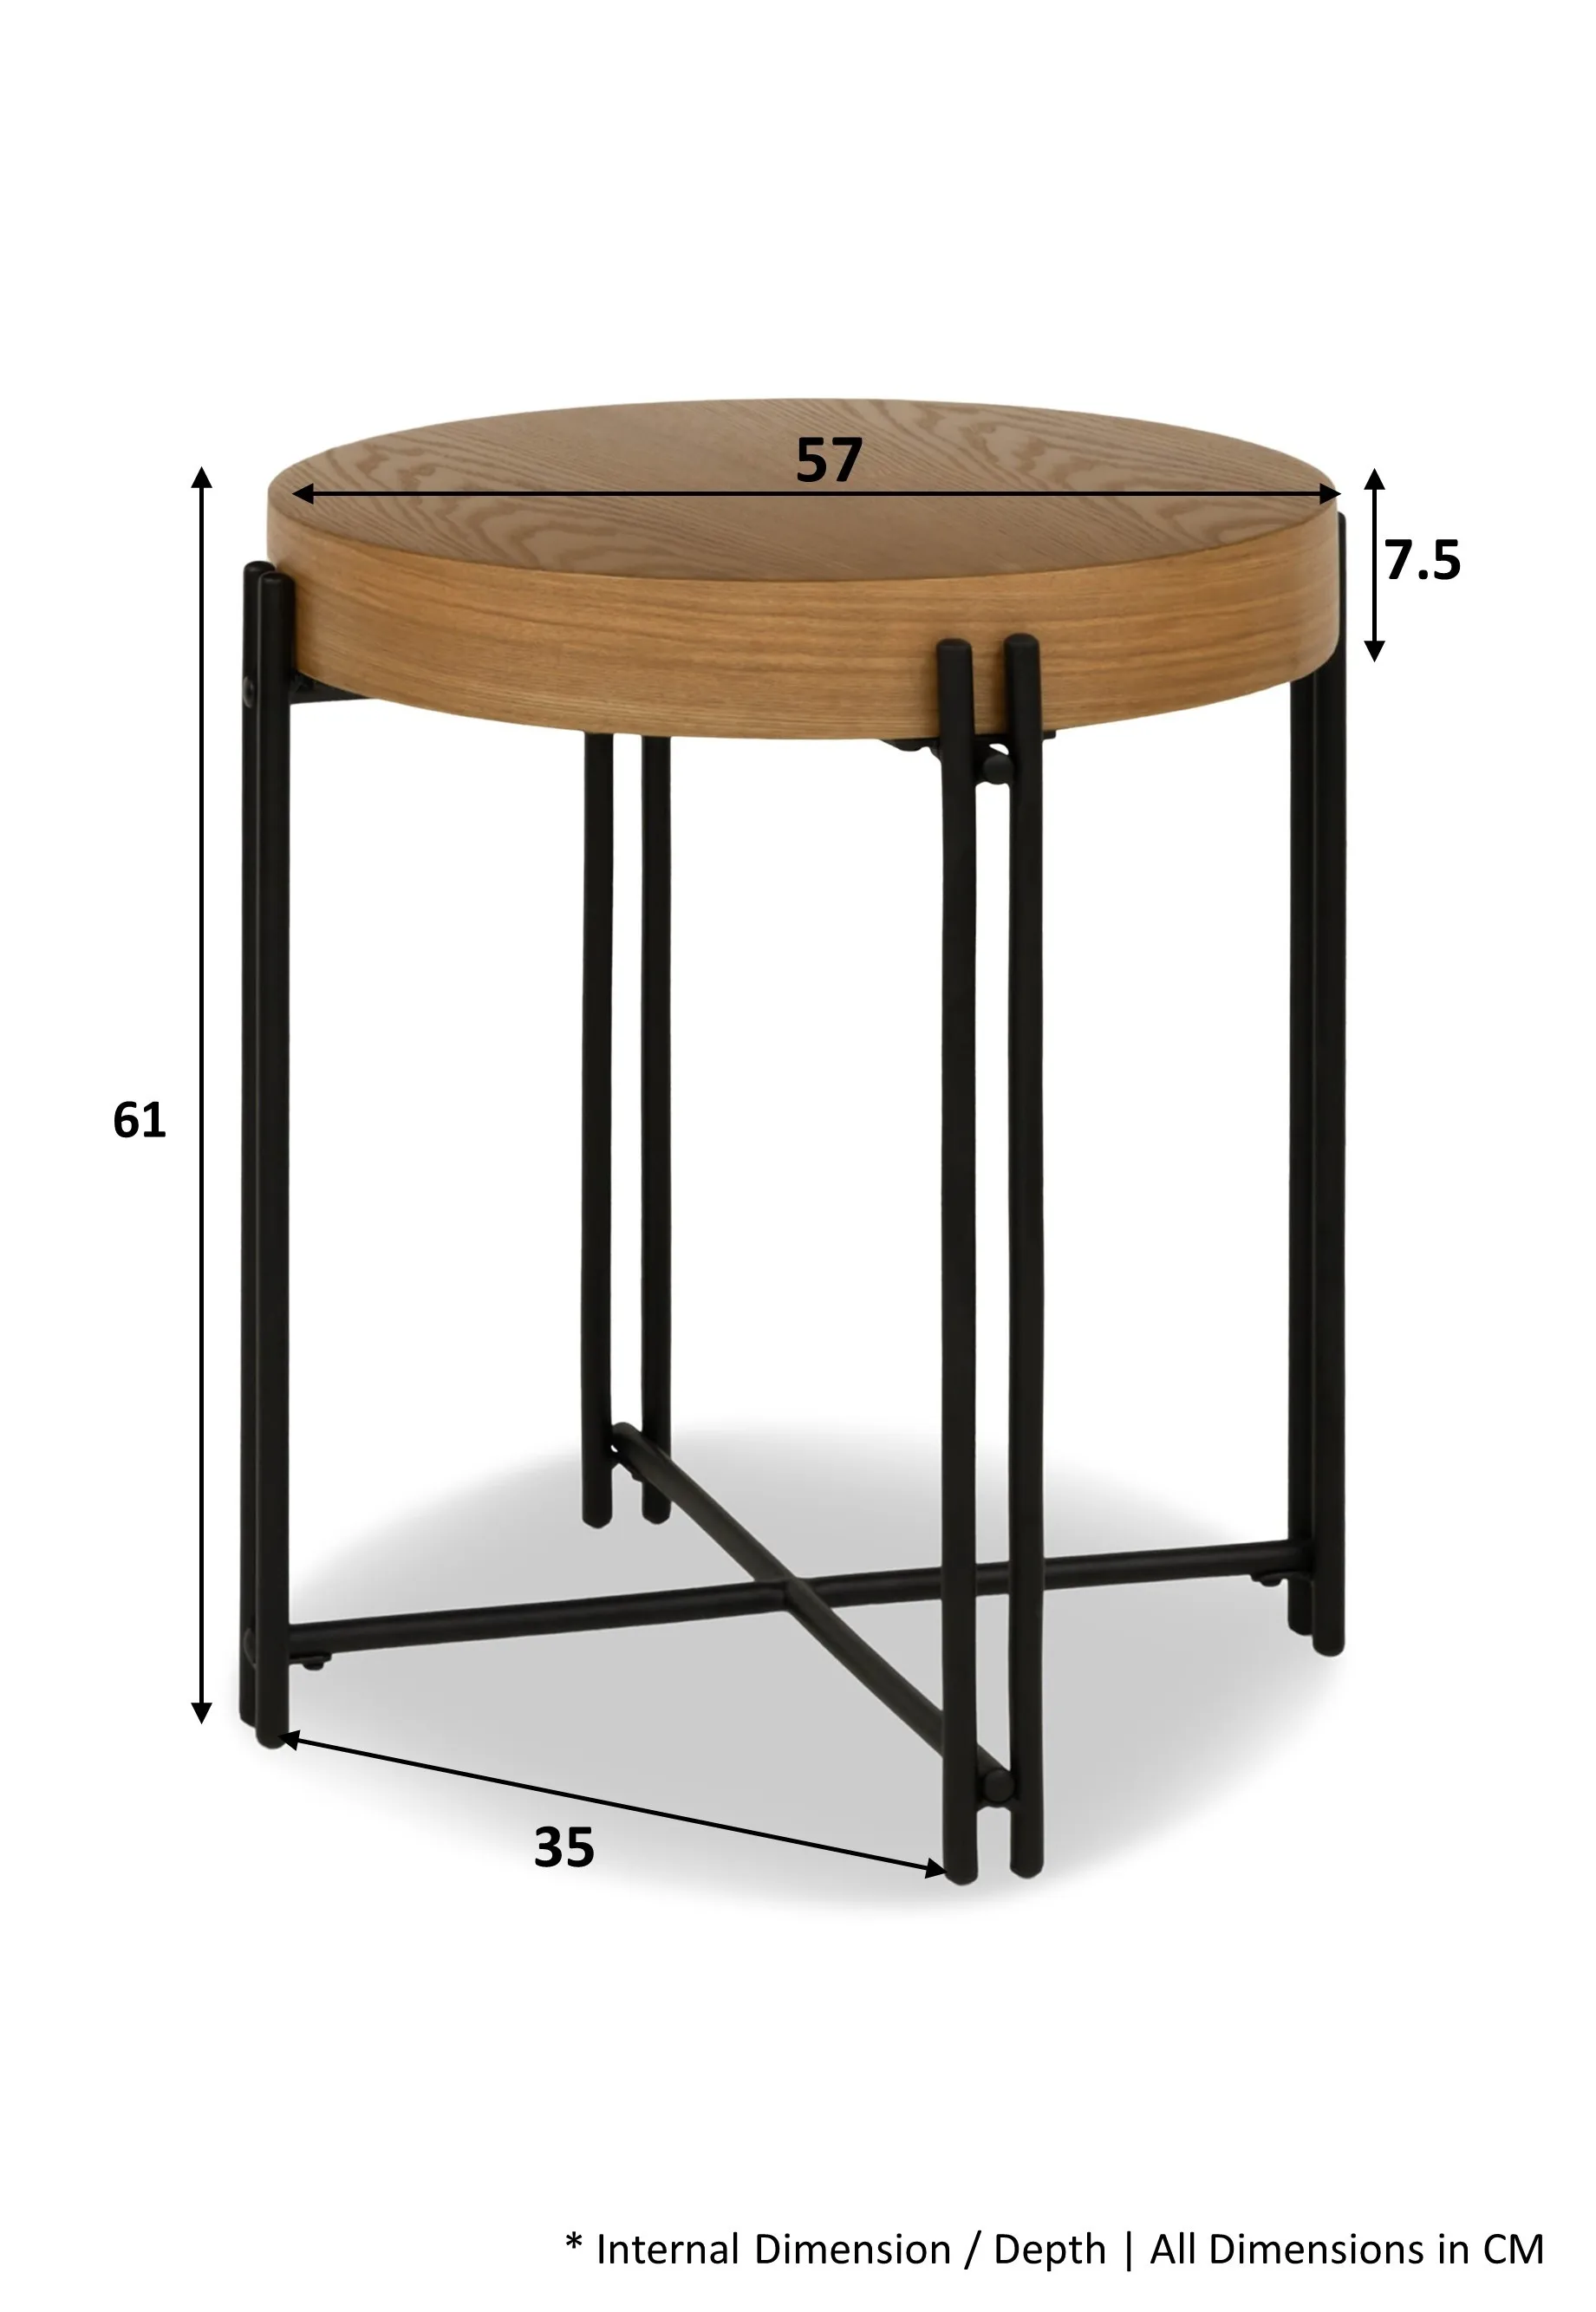 
Industrial Round Wooden And Iron Side Table End Table (Natural Wood) 